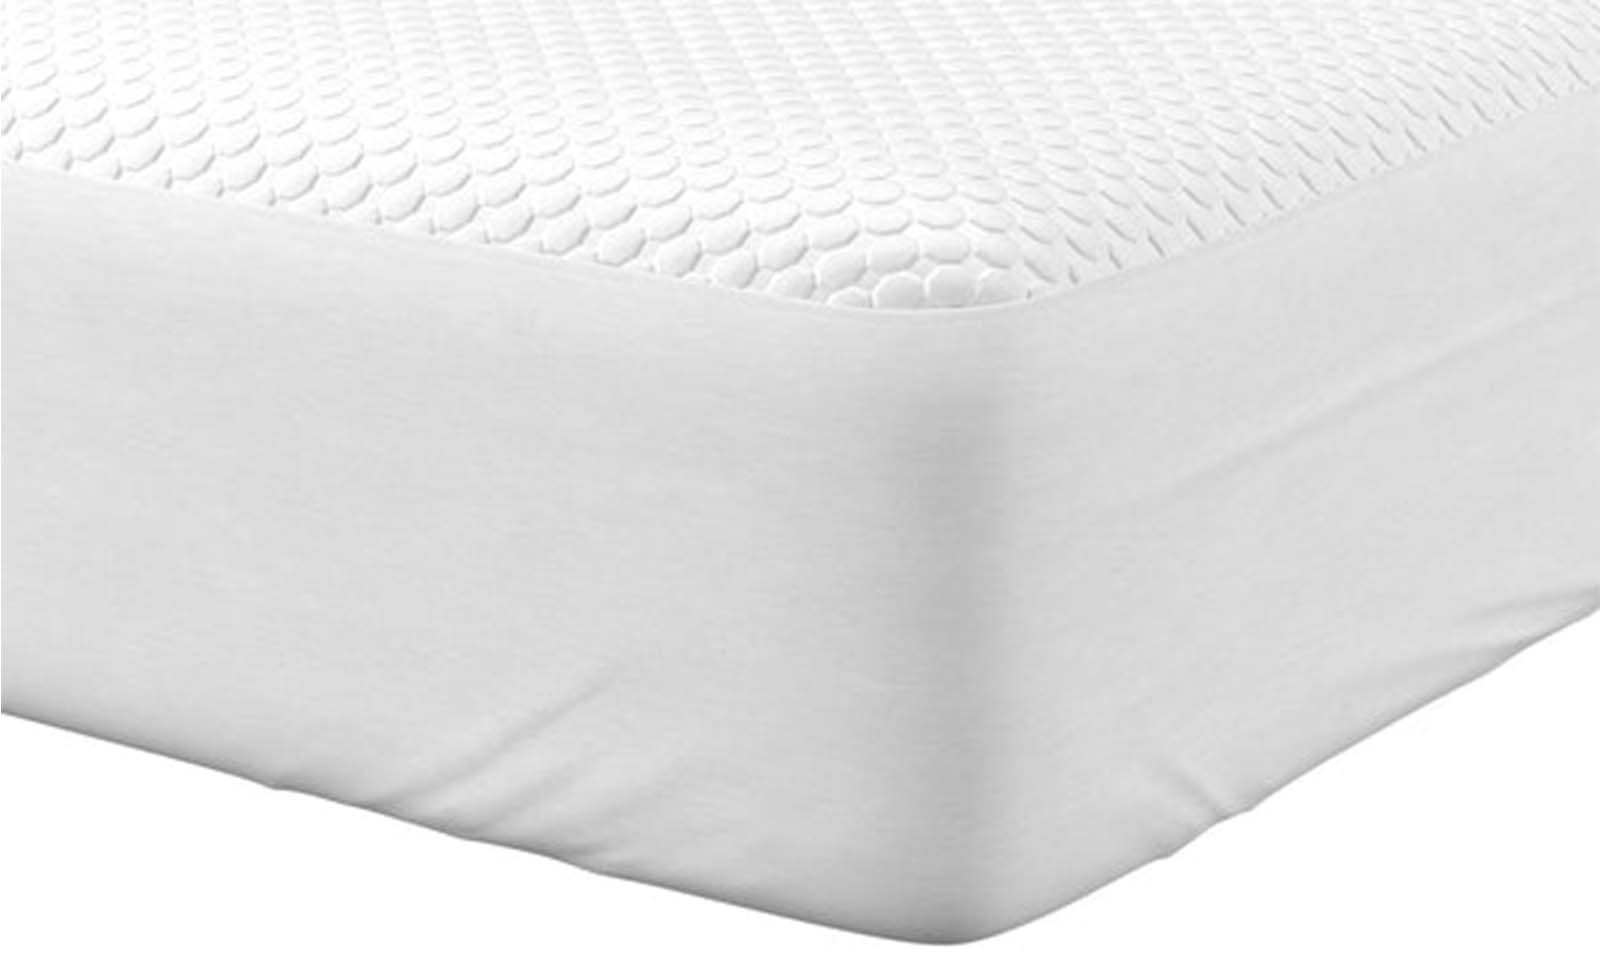 is it worth buying a mattress protector